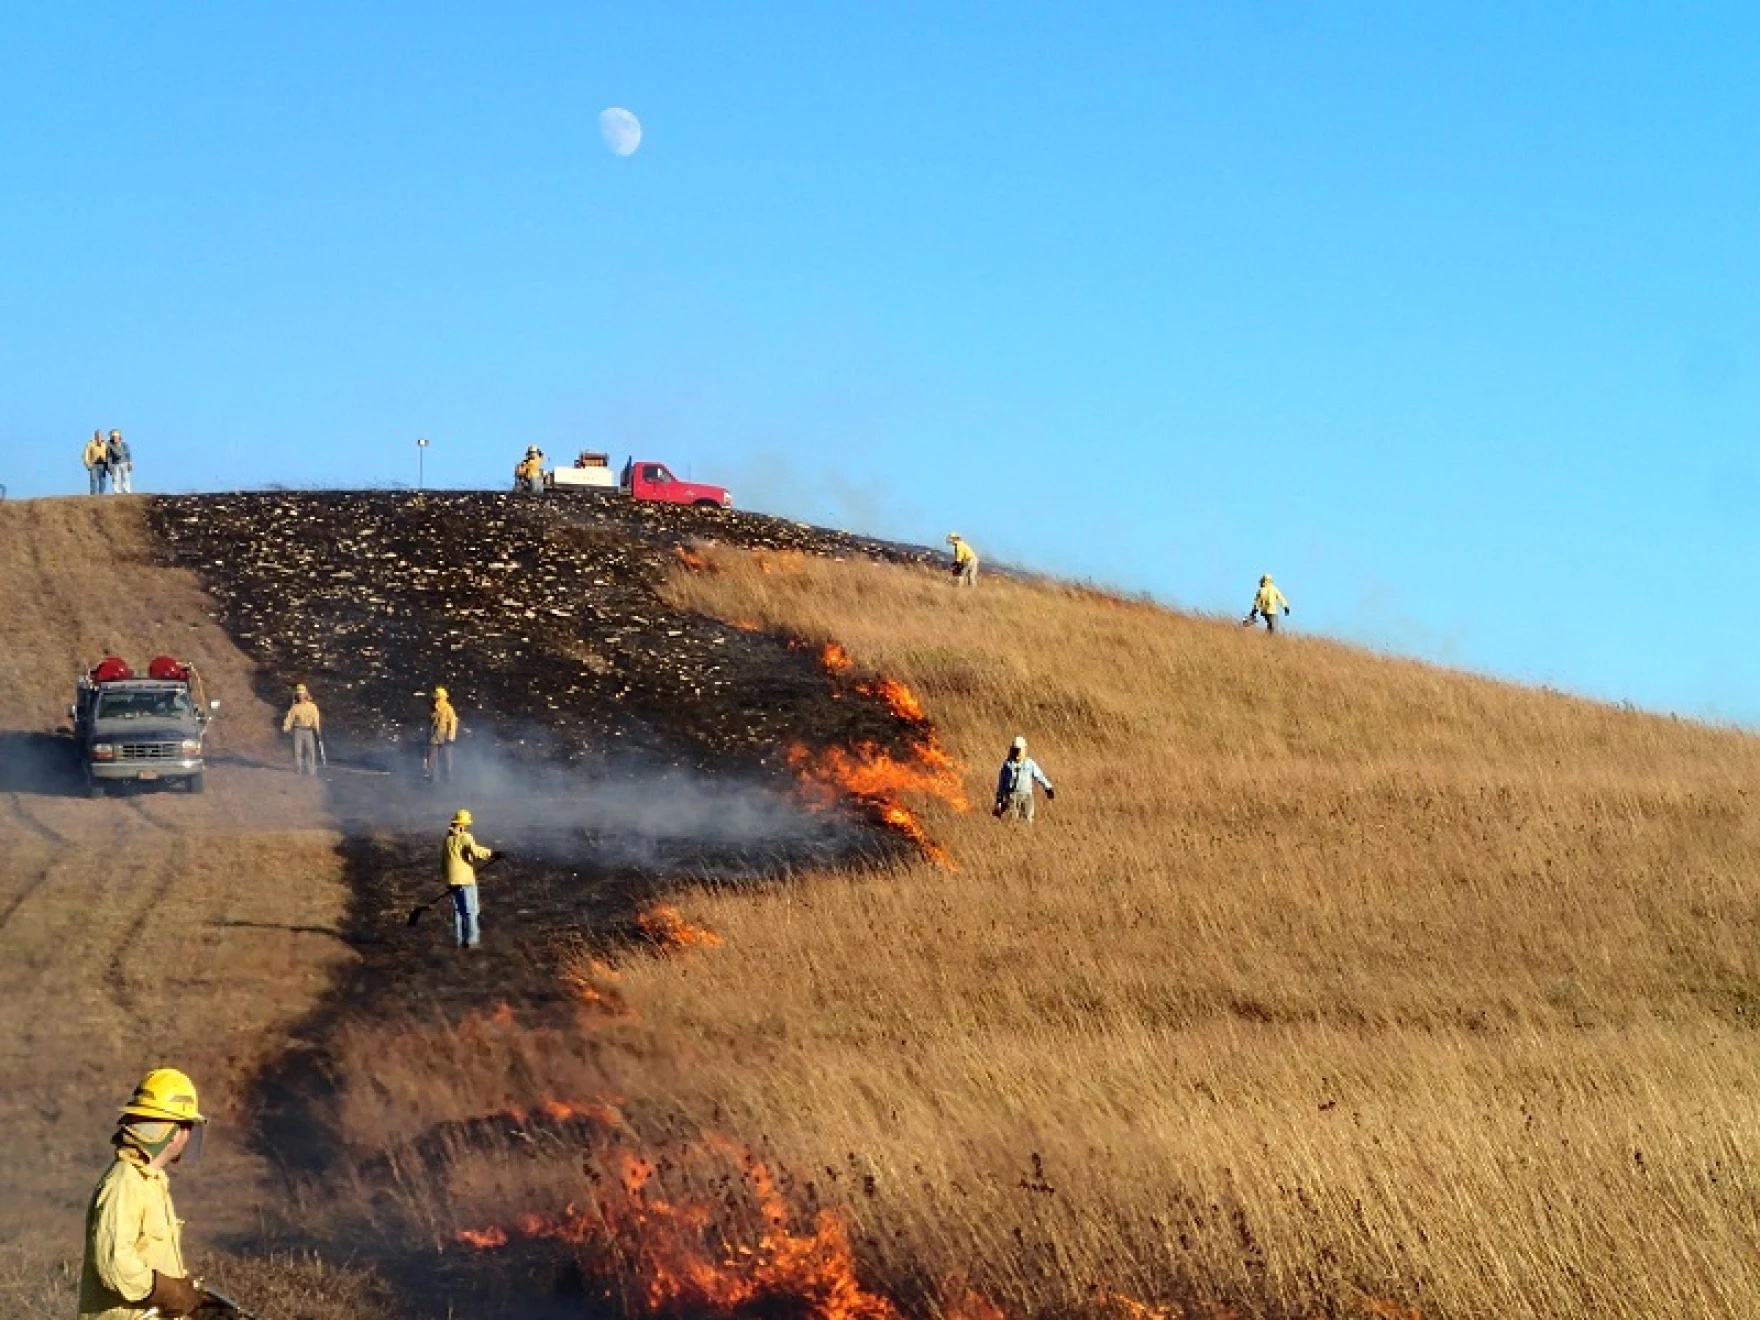 Firefighters quenching a fire blazing on dry grass